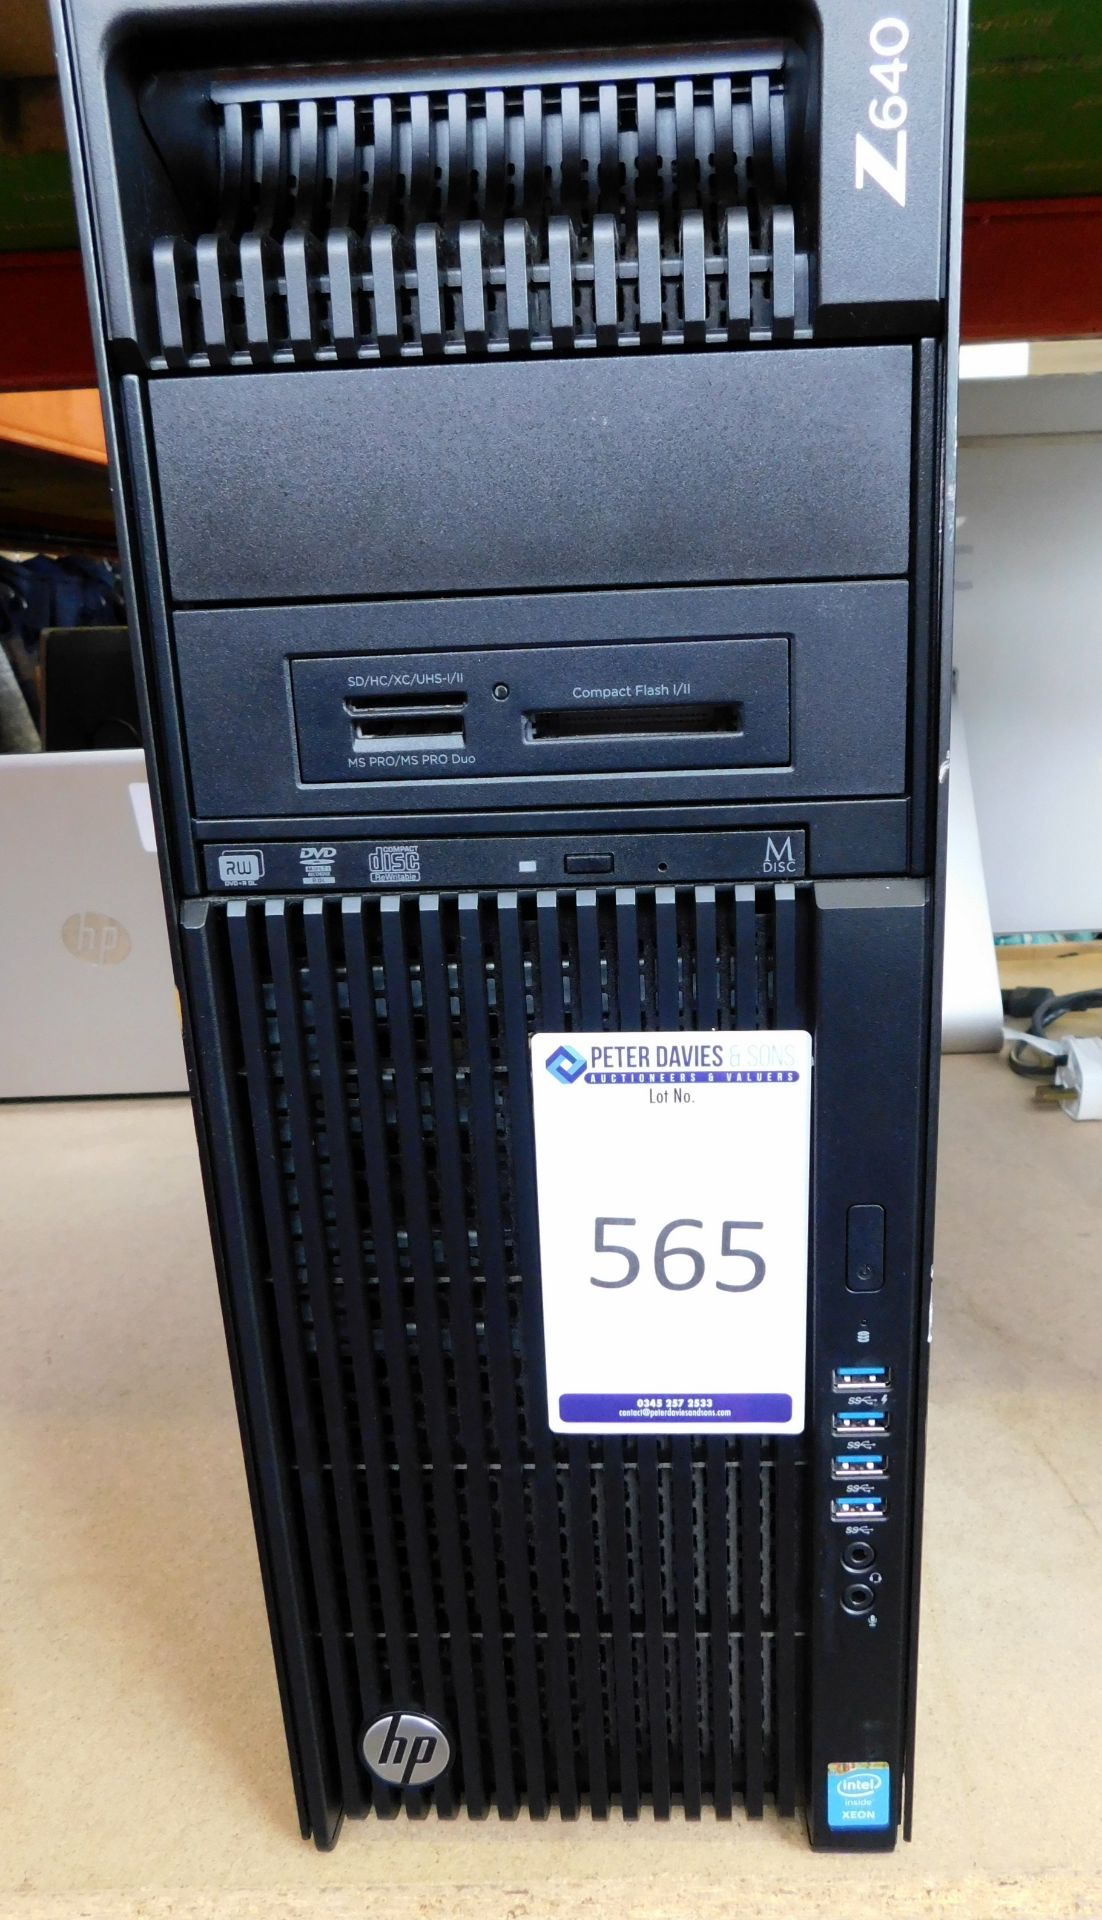 HP Z640Xeon E5 2630V3 2.4ghz Tower Computer with 32gb Ram, 1TB HDD (Located Stockport – Viewing by